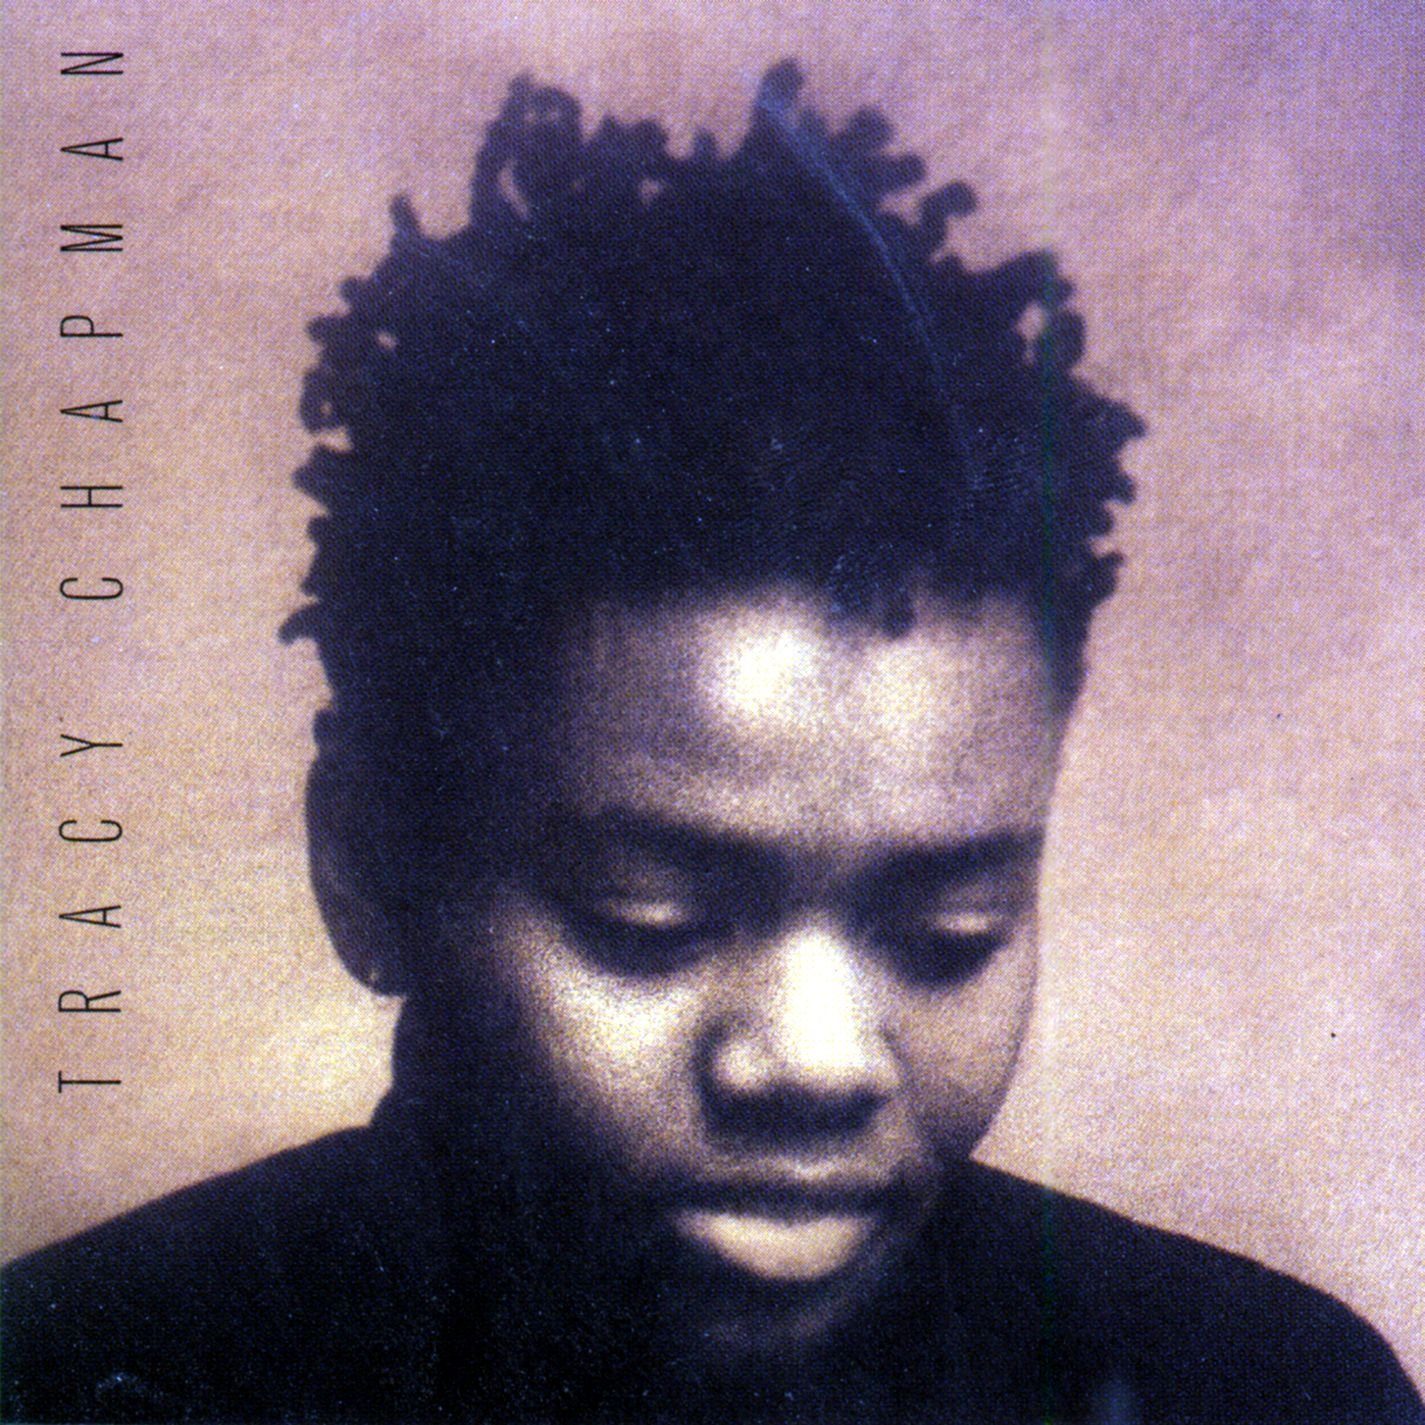 Tracy Chapman Will the First Black Woman to Have a Number One